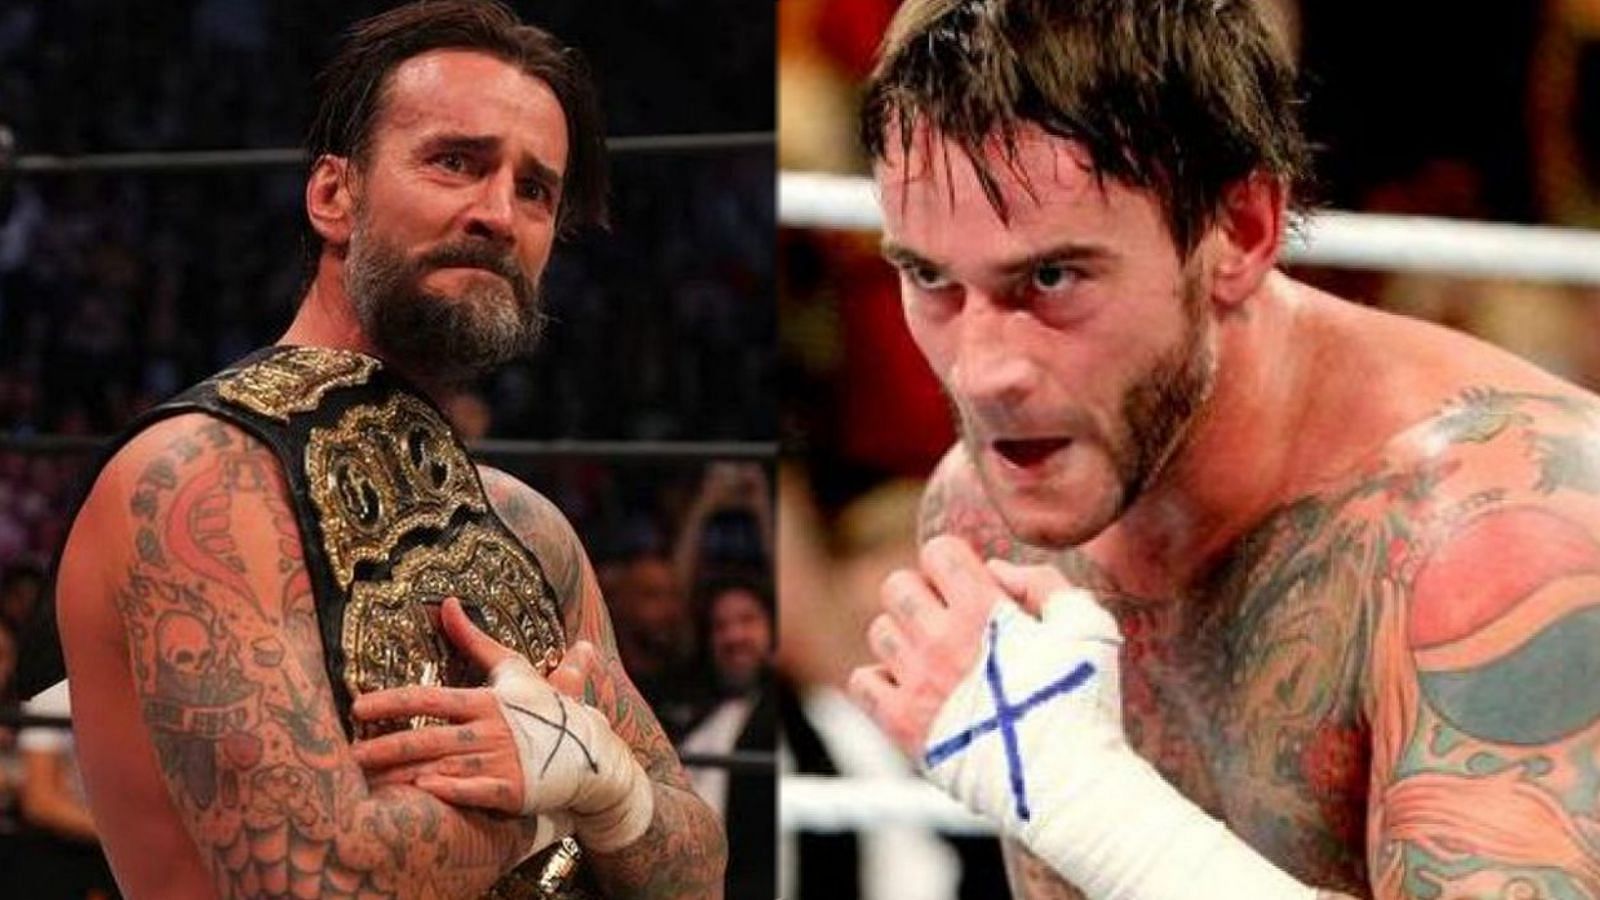 Punk is a former World Champion for both AEW and WWE.